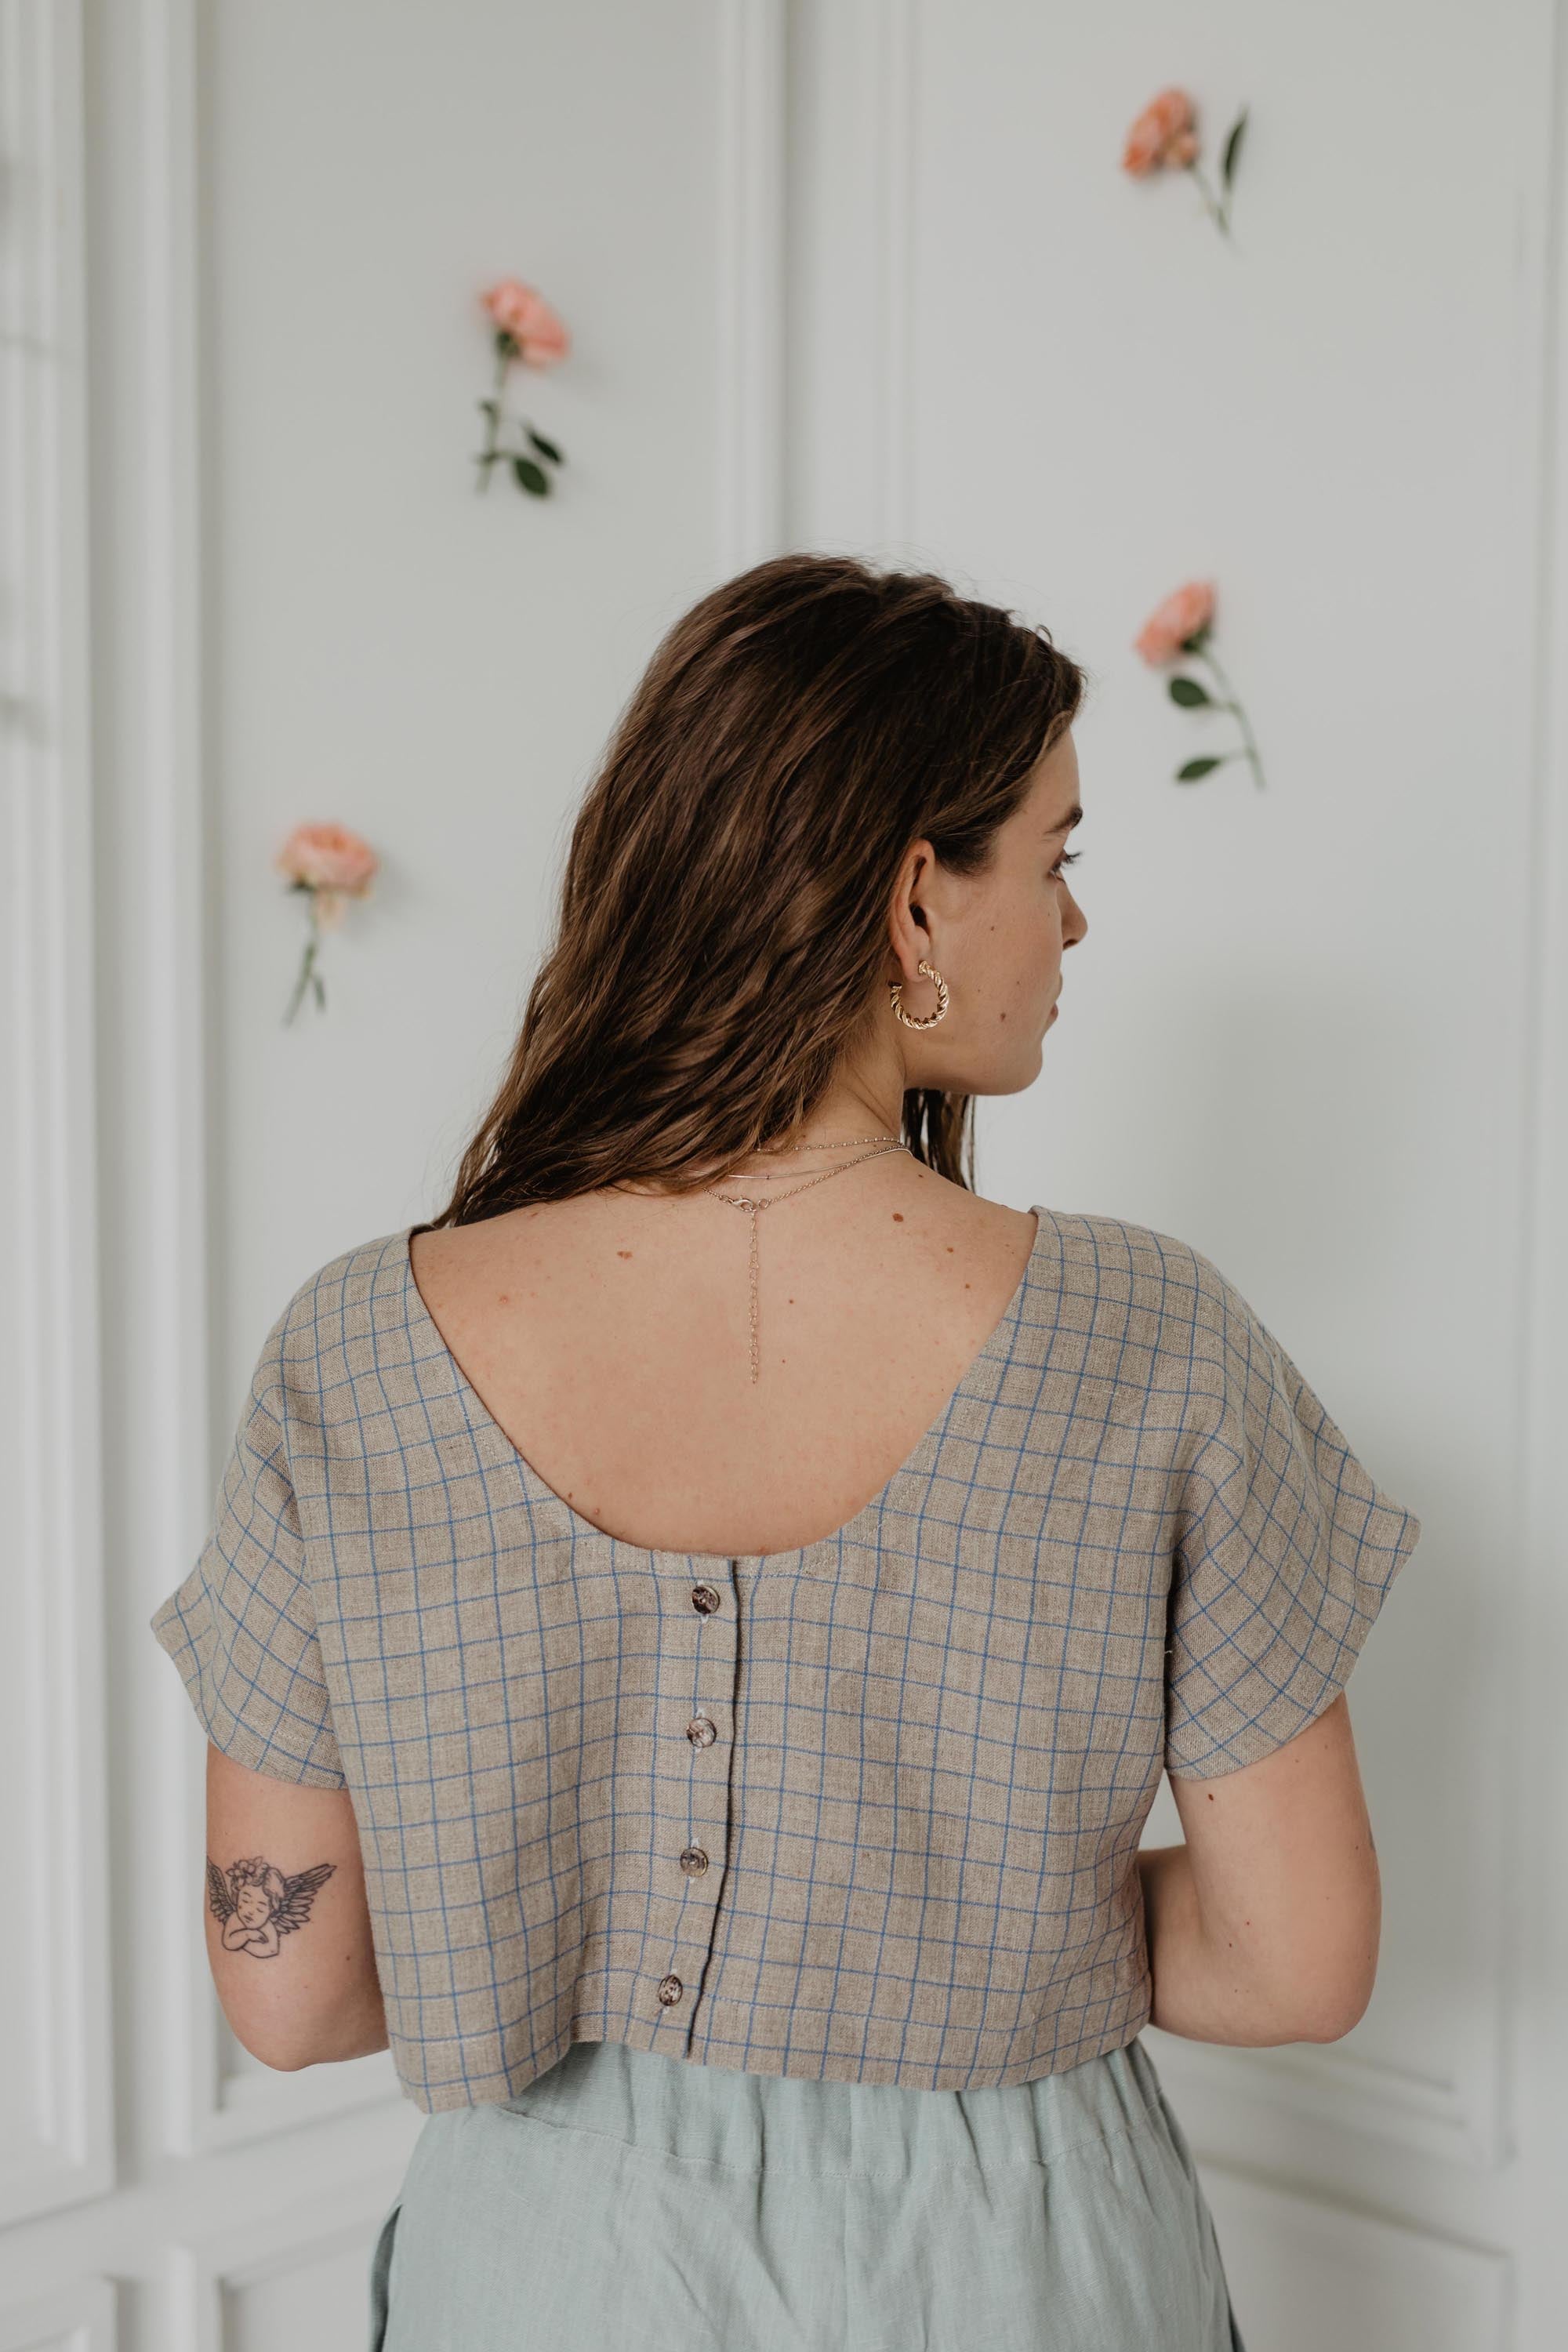 Back Of Woman Wearing A Checkered Linen Crop Top With Buttons